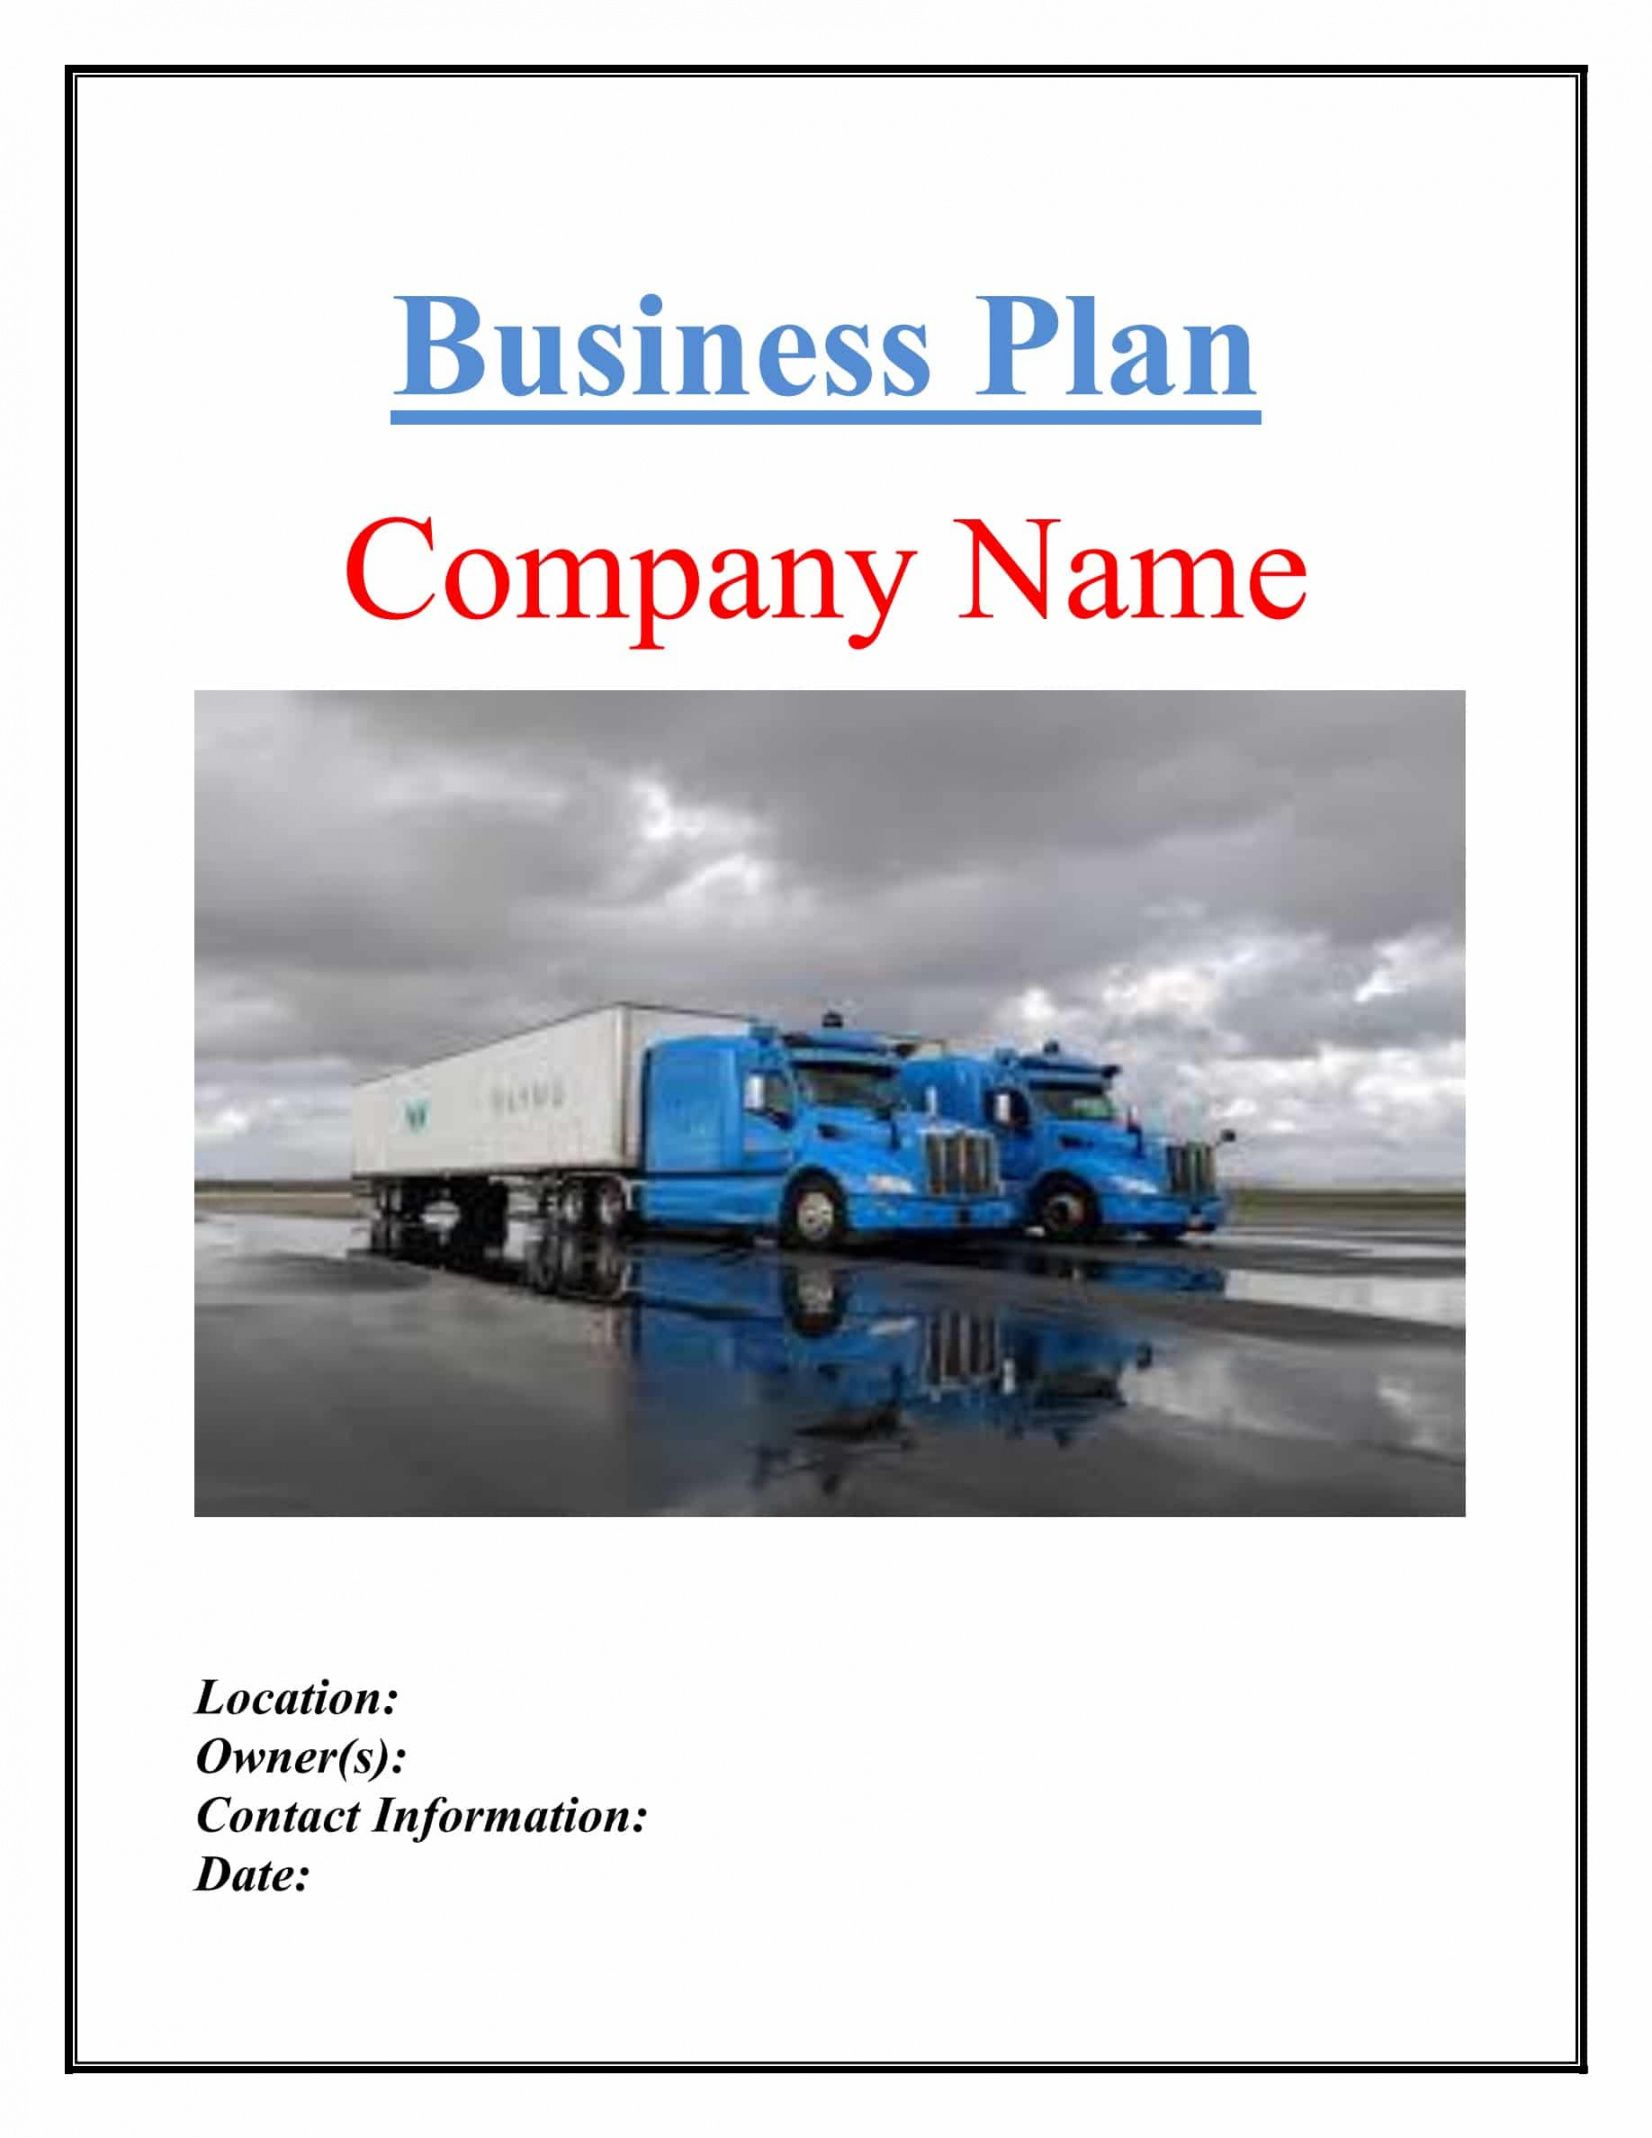 small trucking company business plan